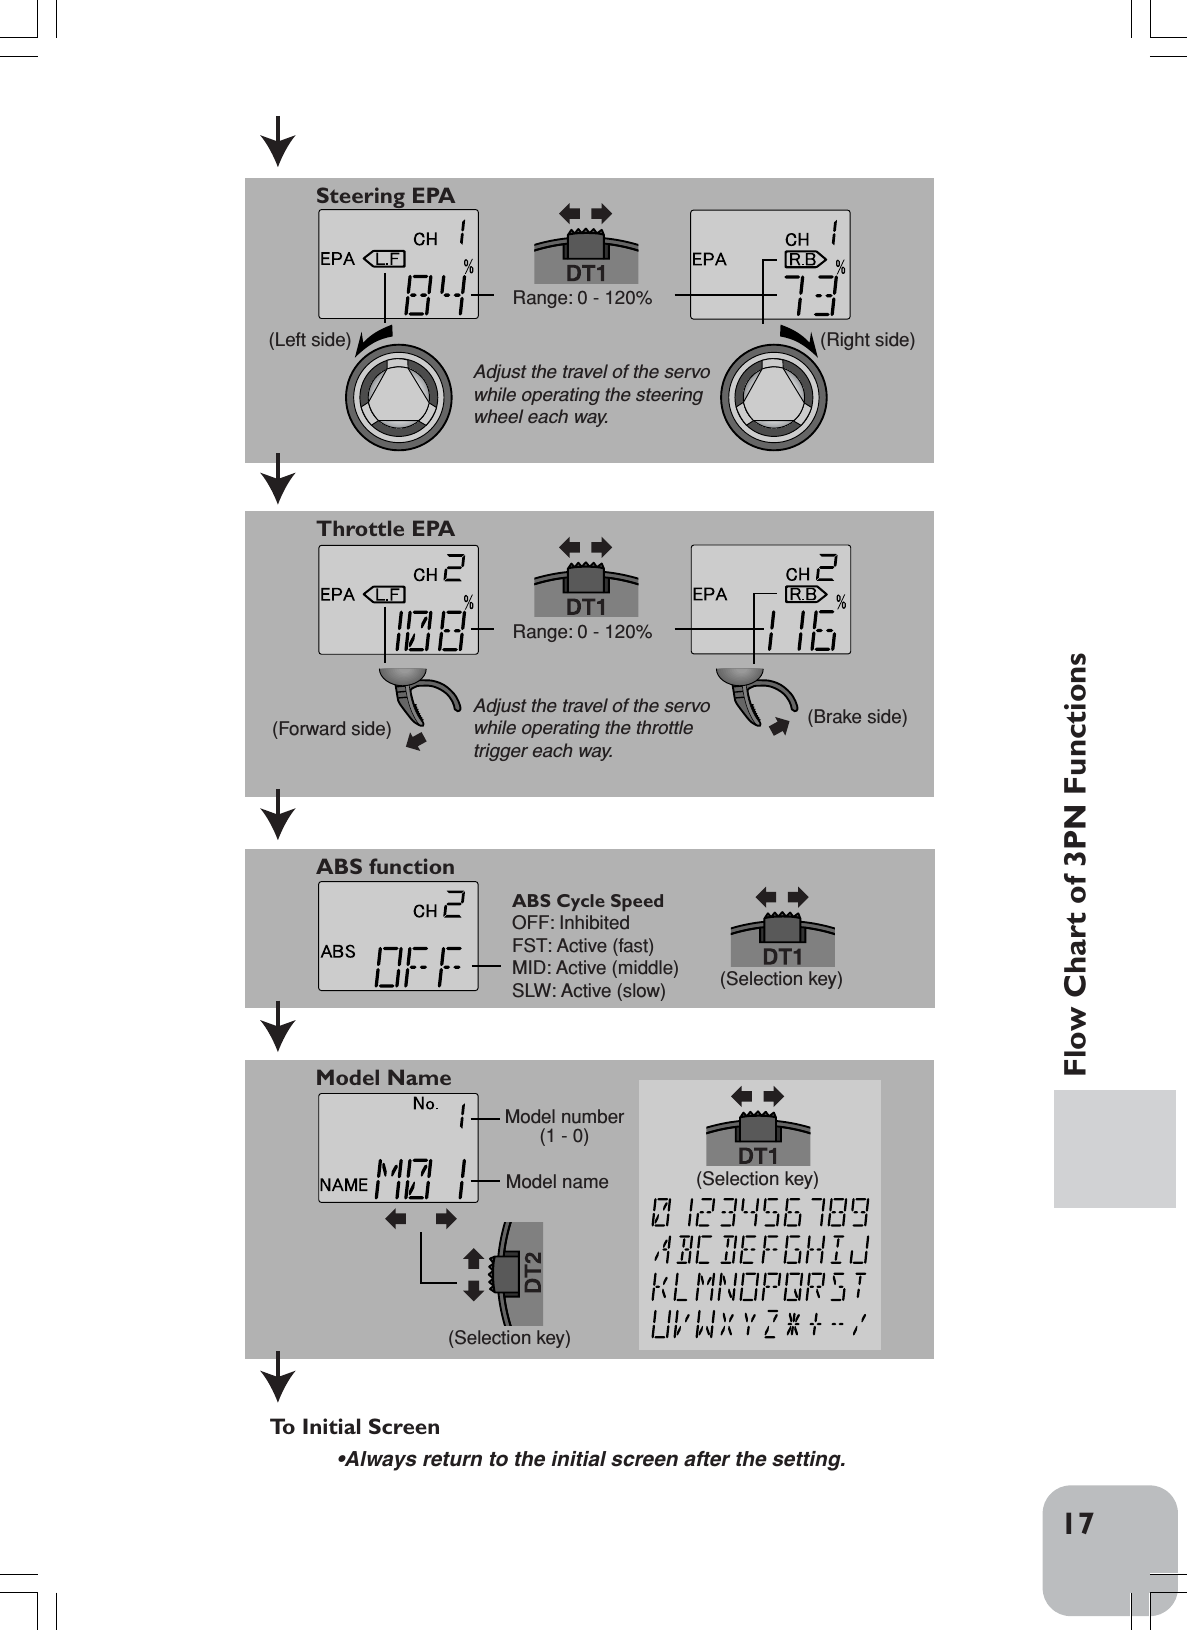 17Flow Chart of 3PN FunctionsSteering EPAAdjust the travel of the servowhile operating the steering wheel each way.Throttle EPAAdjust the travel of the servowhile operating the throttle trigger each way.To Initial ScreenRange: 0 - 120%(Left side) (Right side)Range: 0 - 120%(Forward side) (Brake side)ABS Cycle SpeedOFF: InhibitedFST: Active (fast)MID: Active (middle)SLW: Active (slow) ABS functionModel Name(Selection key)(Selection key)(Selection key)Model number(1 - 0)Model name•Always return to the initial screen after the setting.